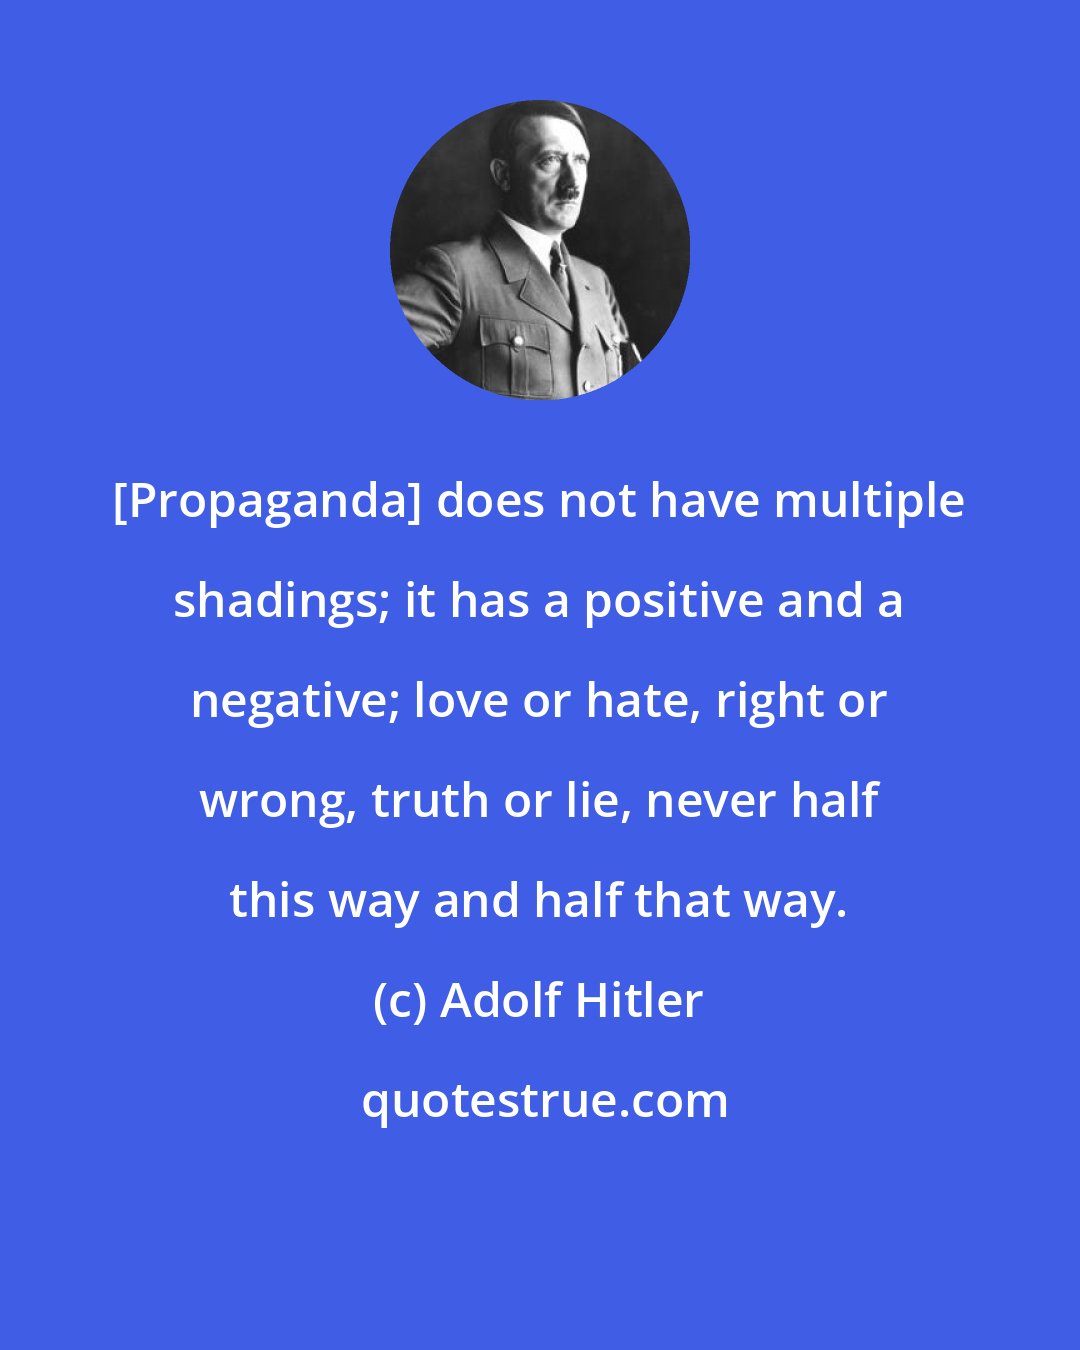 Adolf Hitler: [Propaganda] does not have multiple shadings; it has a positive and a negative; love or hate, right or wrong, truth or lie, never half this way and half that way.